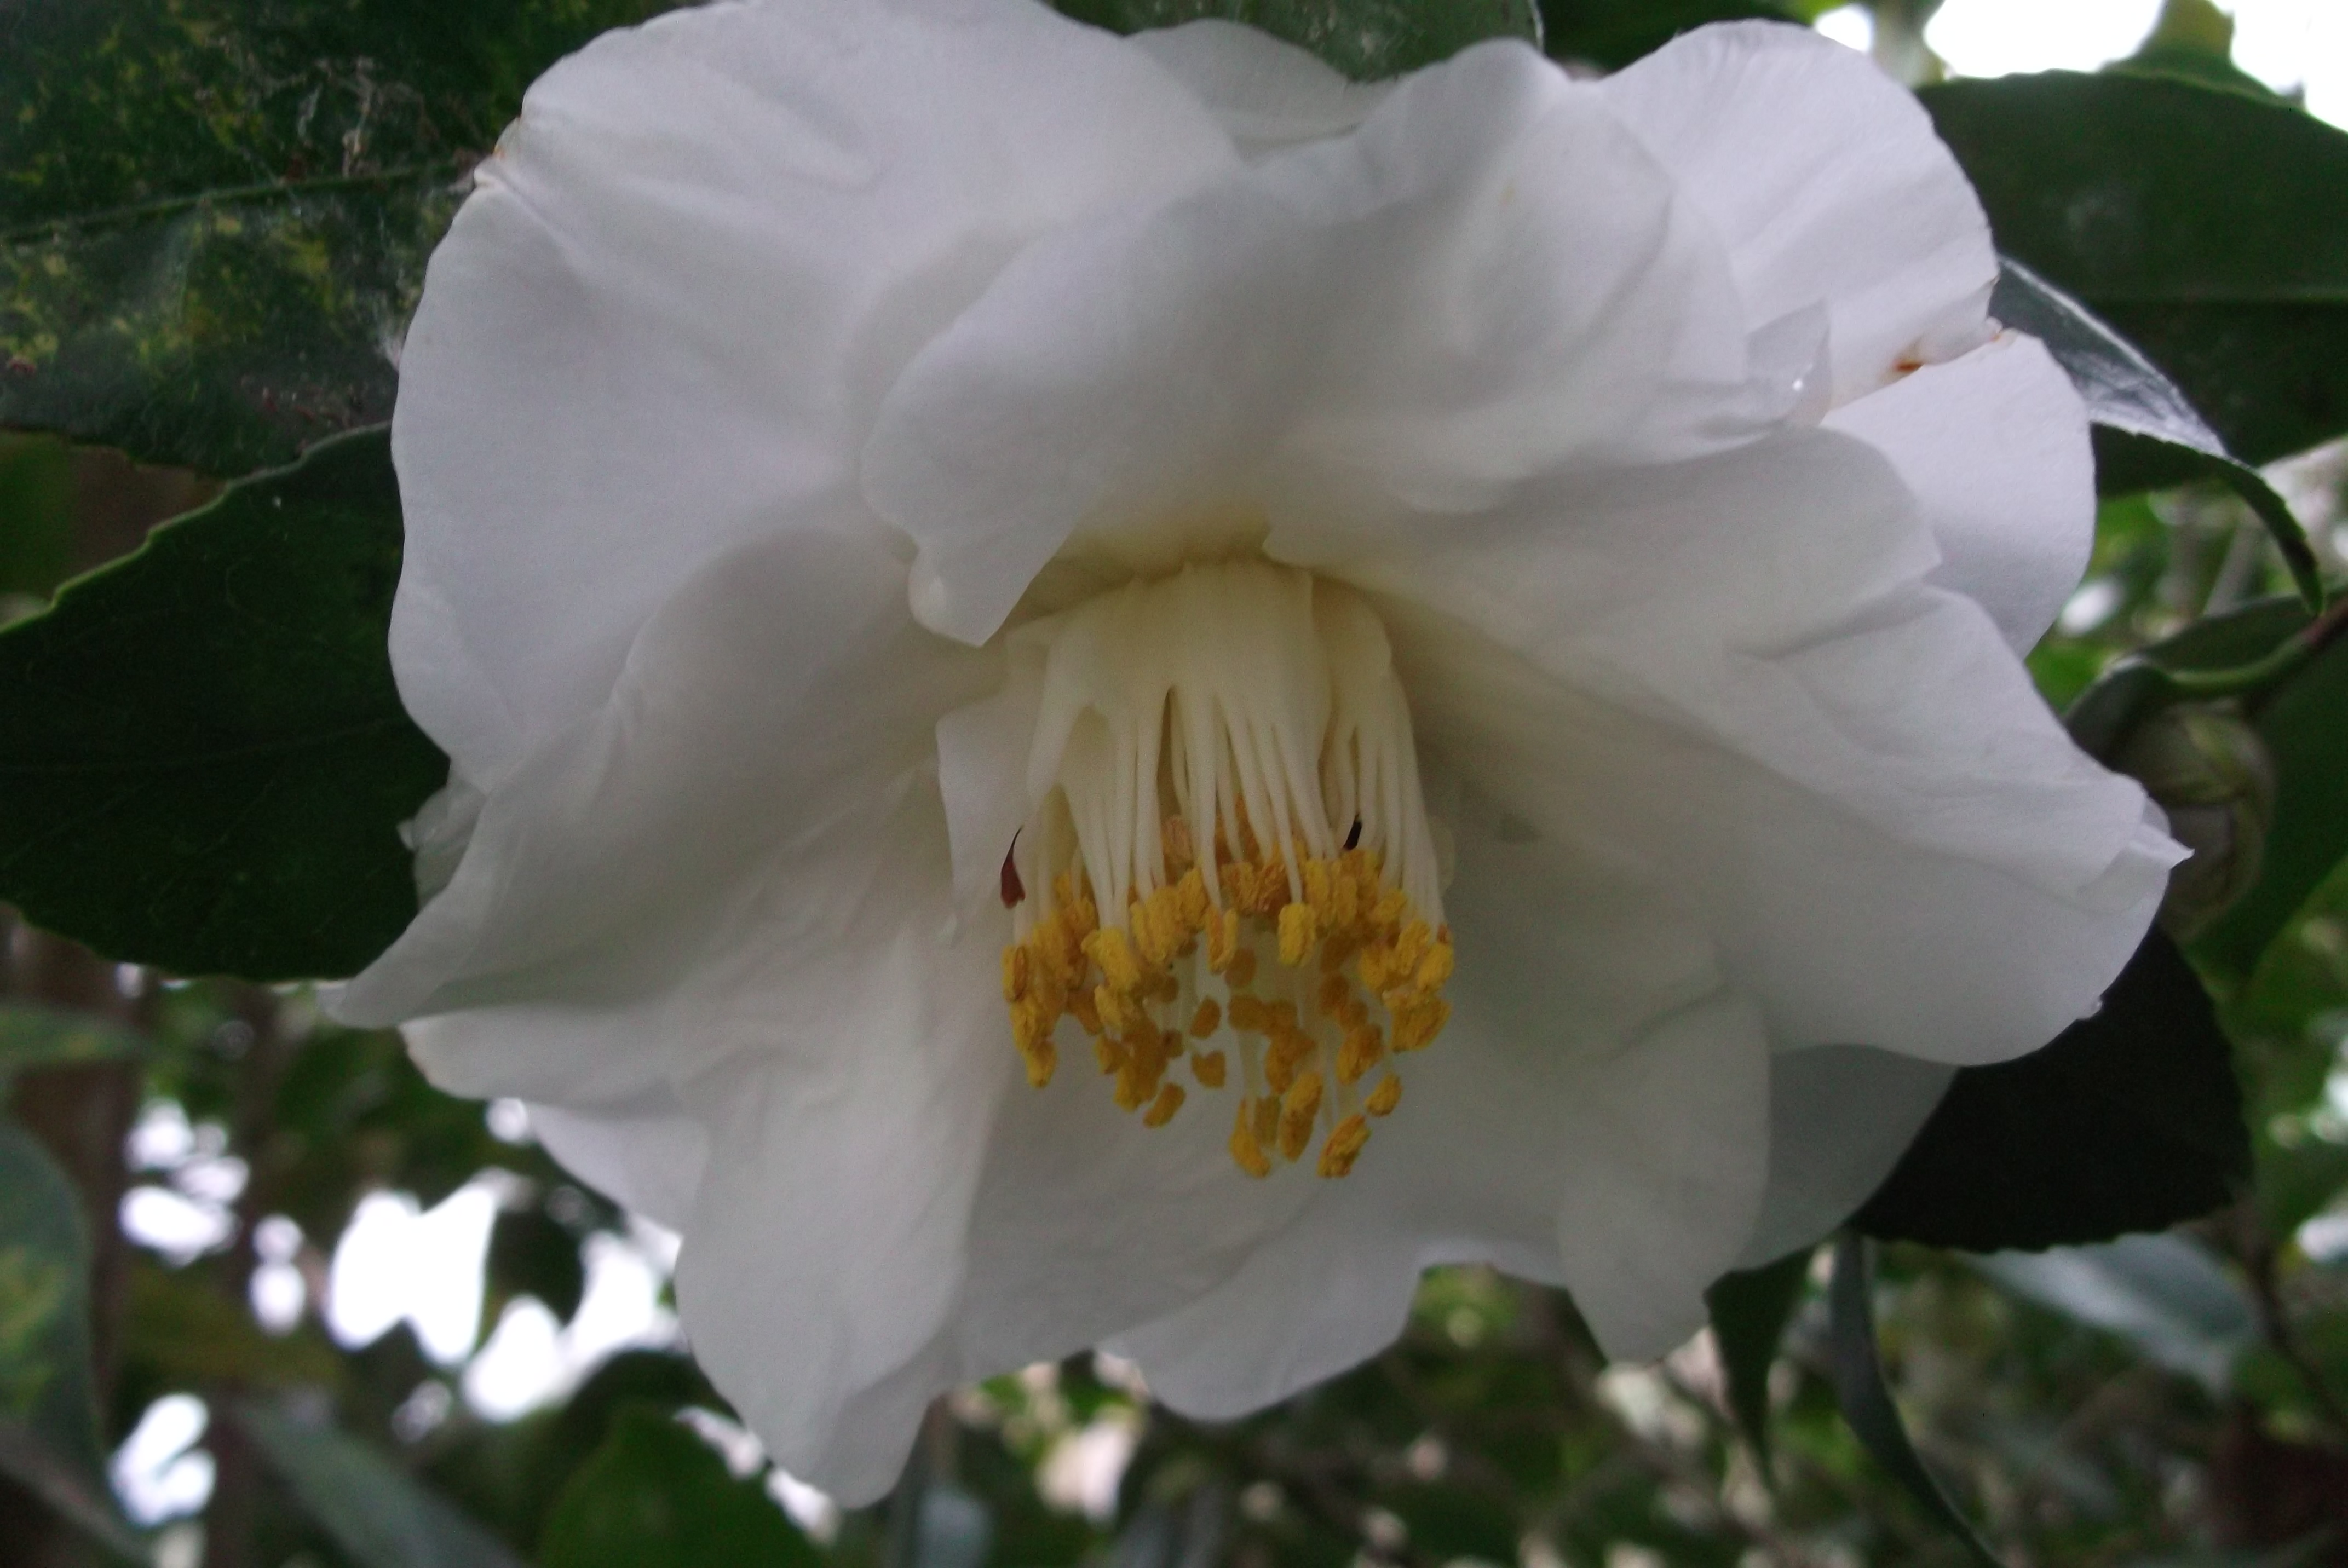 No Regrets of White Camellias | SECRETS of a SEED SCATTERER